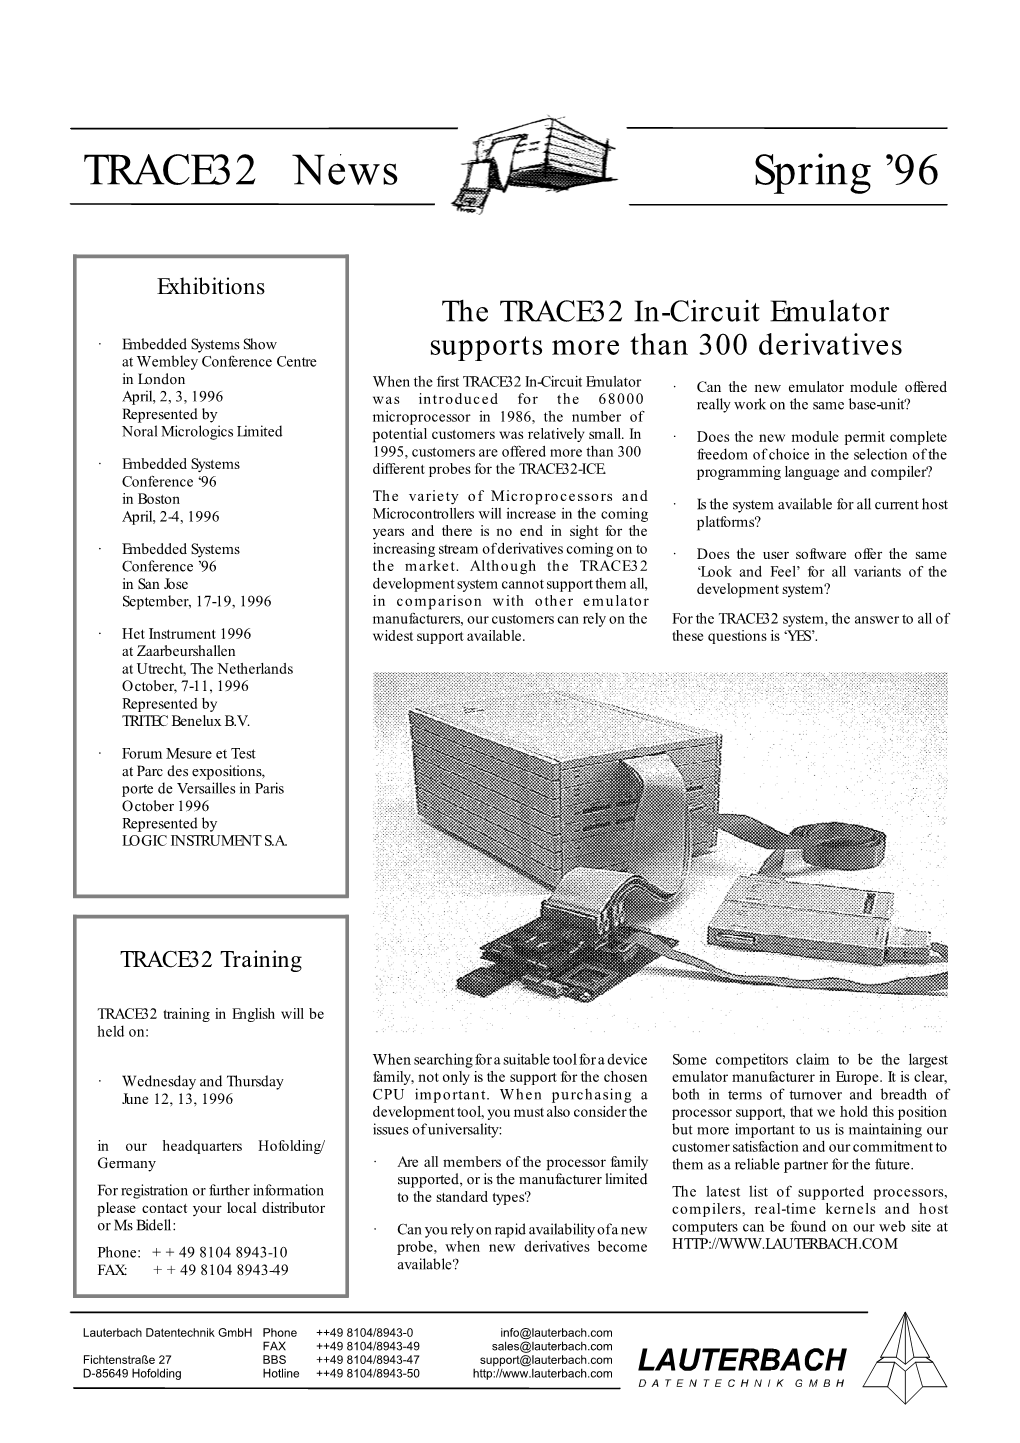 TRACE32 News Spring ’96